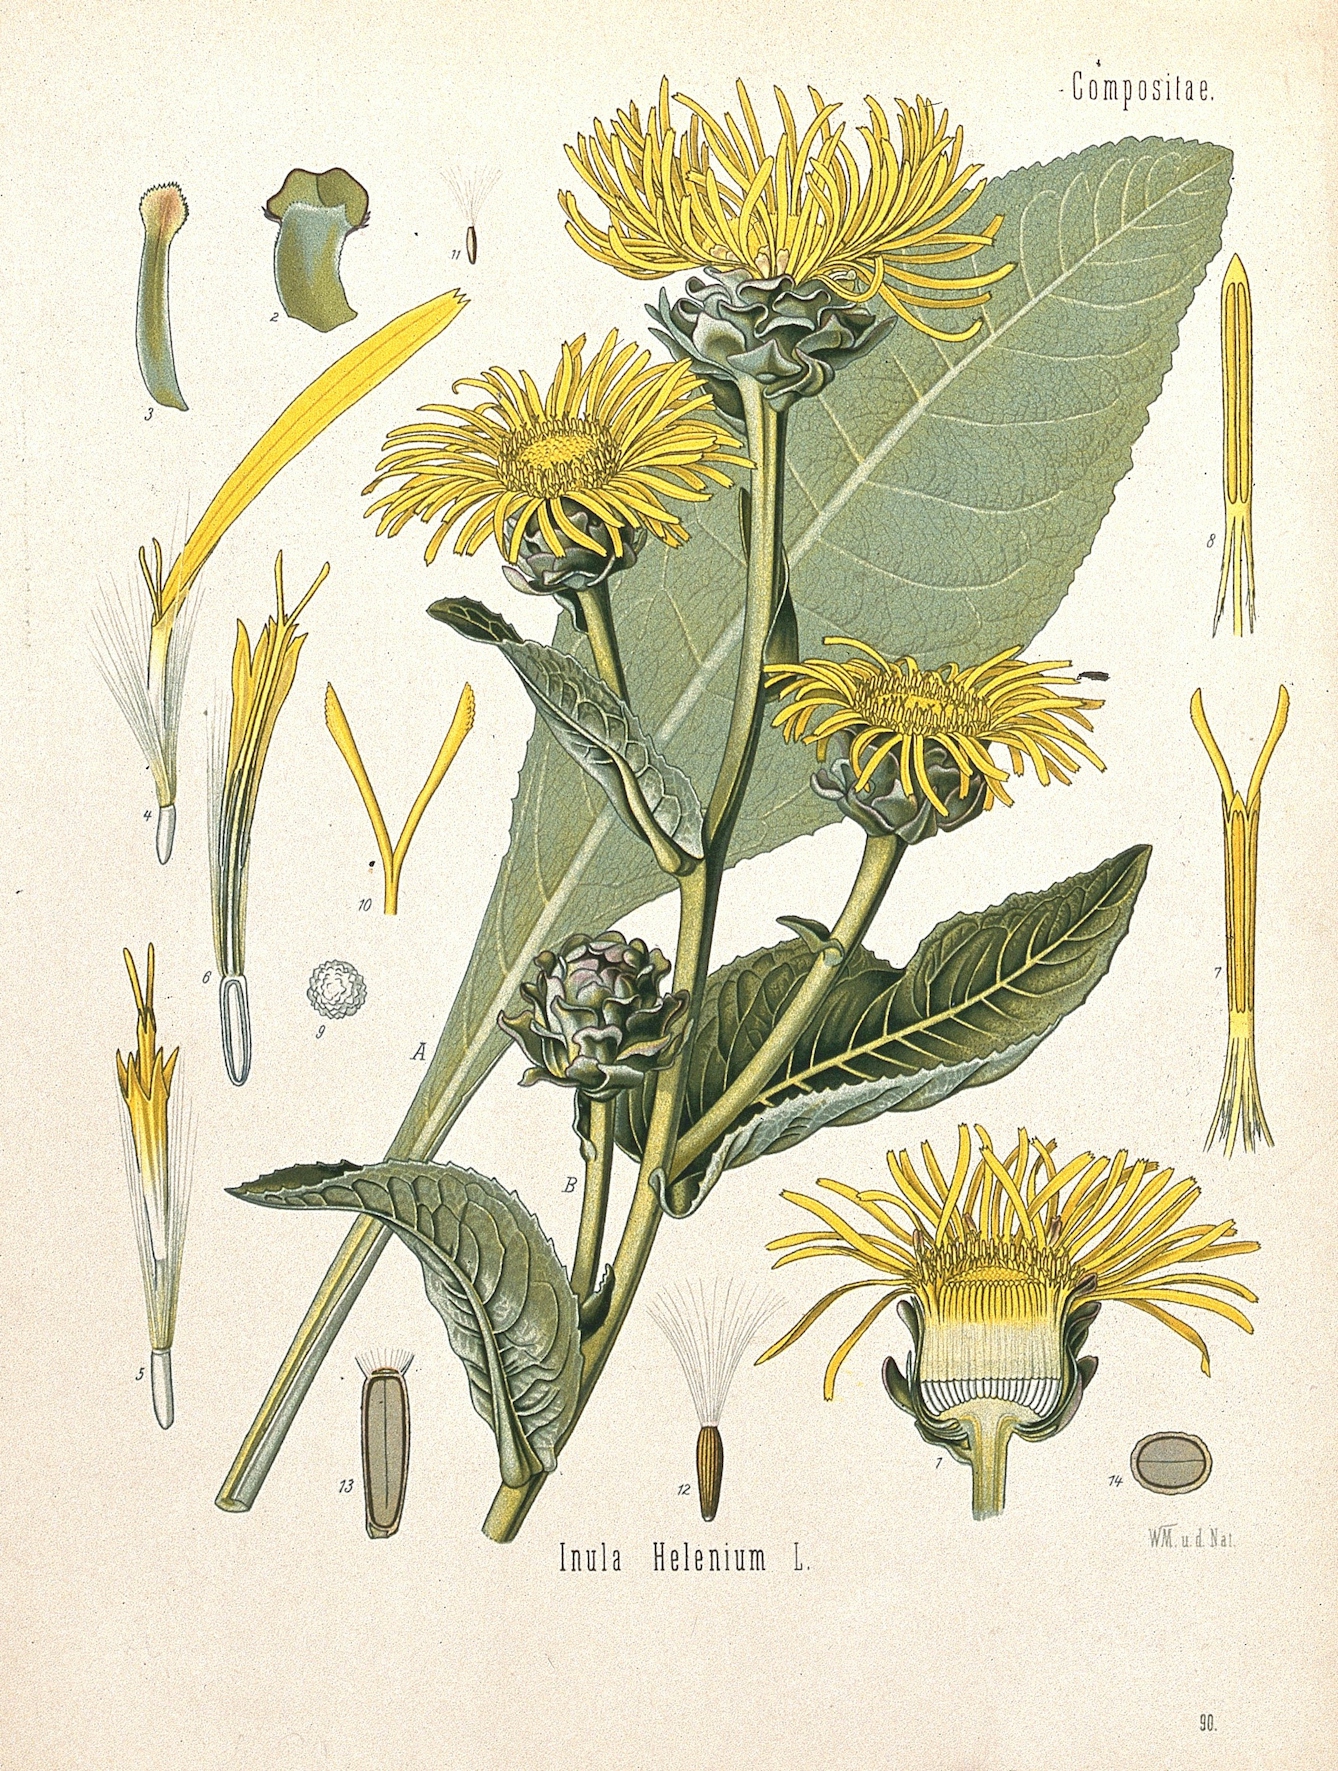 A diagram of a yellow flower featuring details of its various parts.